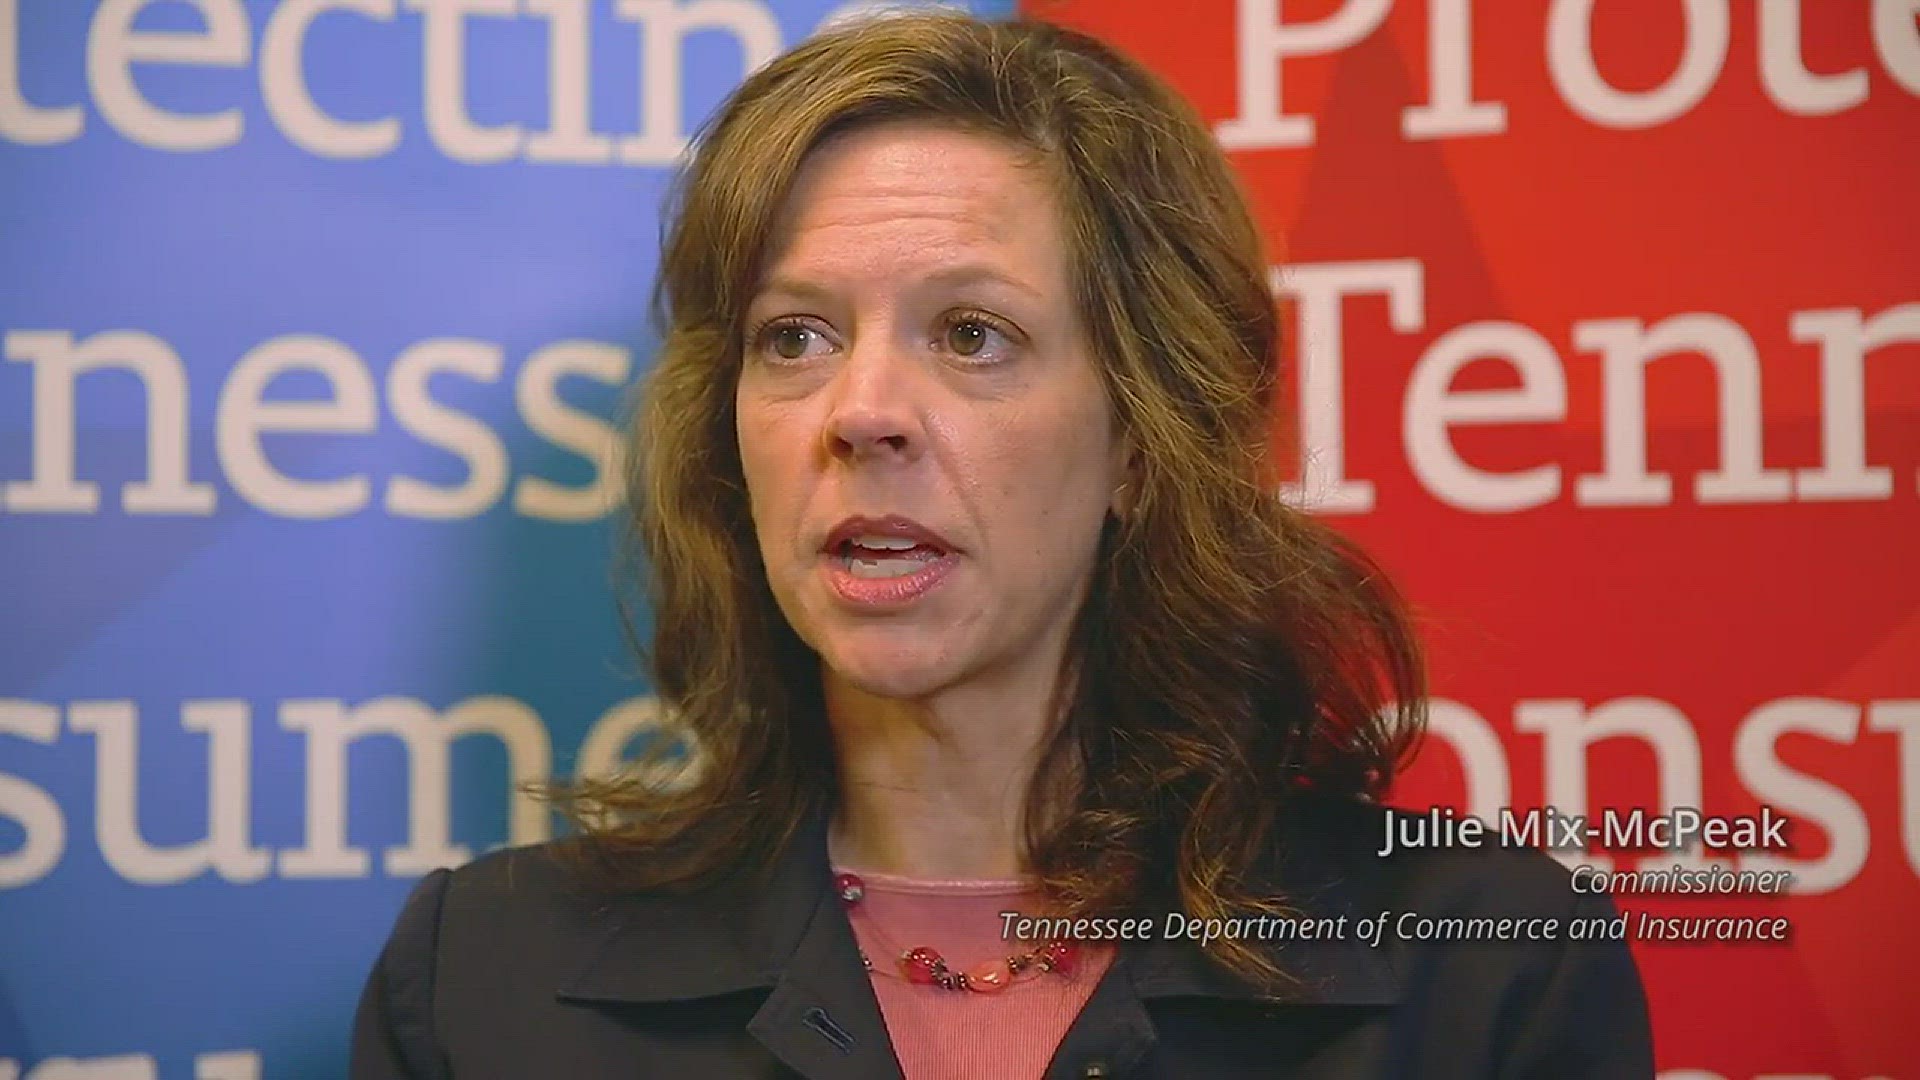 The TN Department of Commerce and Insurance Commissioner says BlueCross' willingness to return to the individual market for Knoxville is a 'glimmer of hope.' (Video from Tennessee Department of Commerce and Insurance)